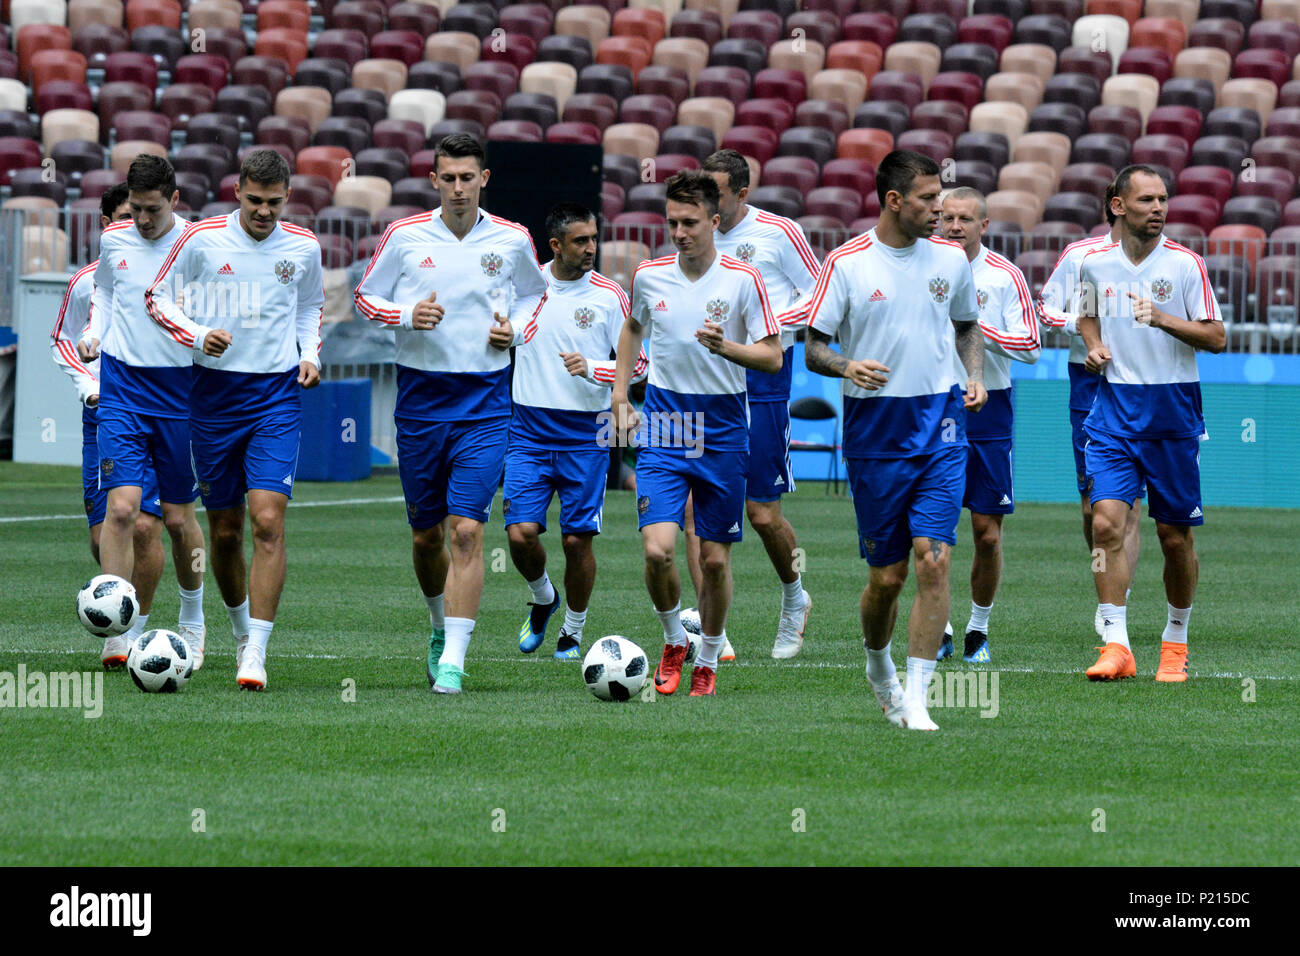 Moscow, Russia - June 13, 2018. National team of Russia at workout one day before the opening match of FIFA World Cup 2018 Russia vs Saudi Arabia. Credit: Alizada Studios/Alamy Live News Stock Photo